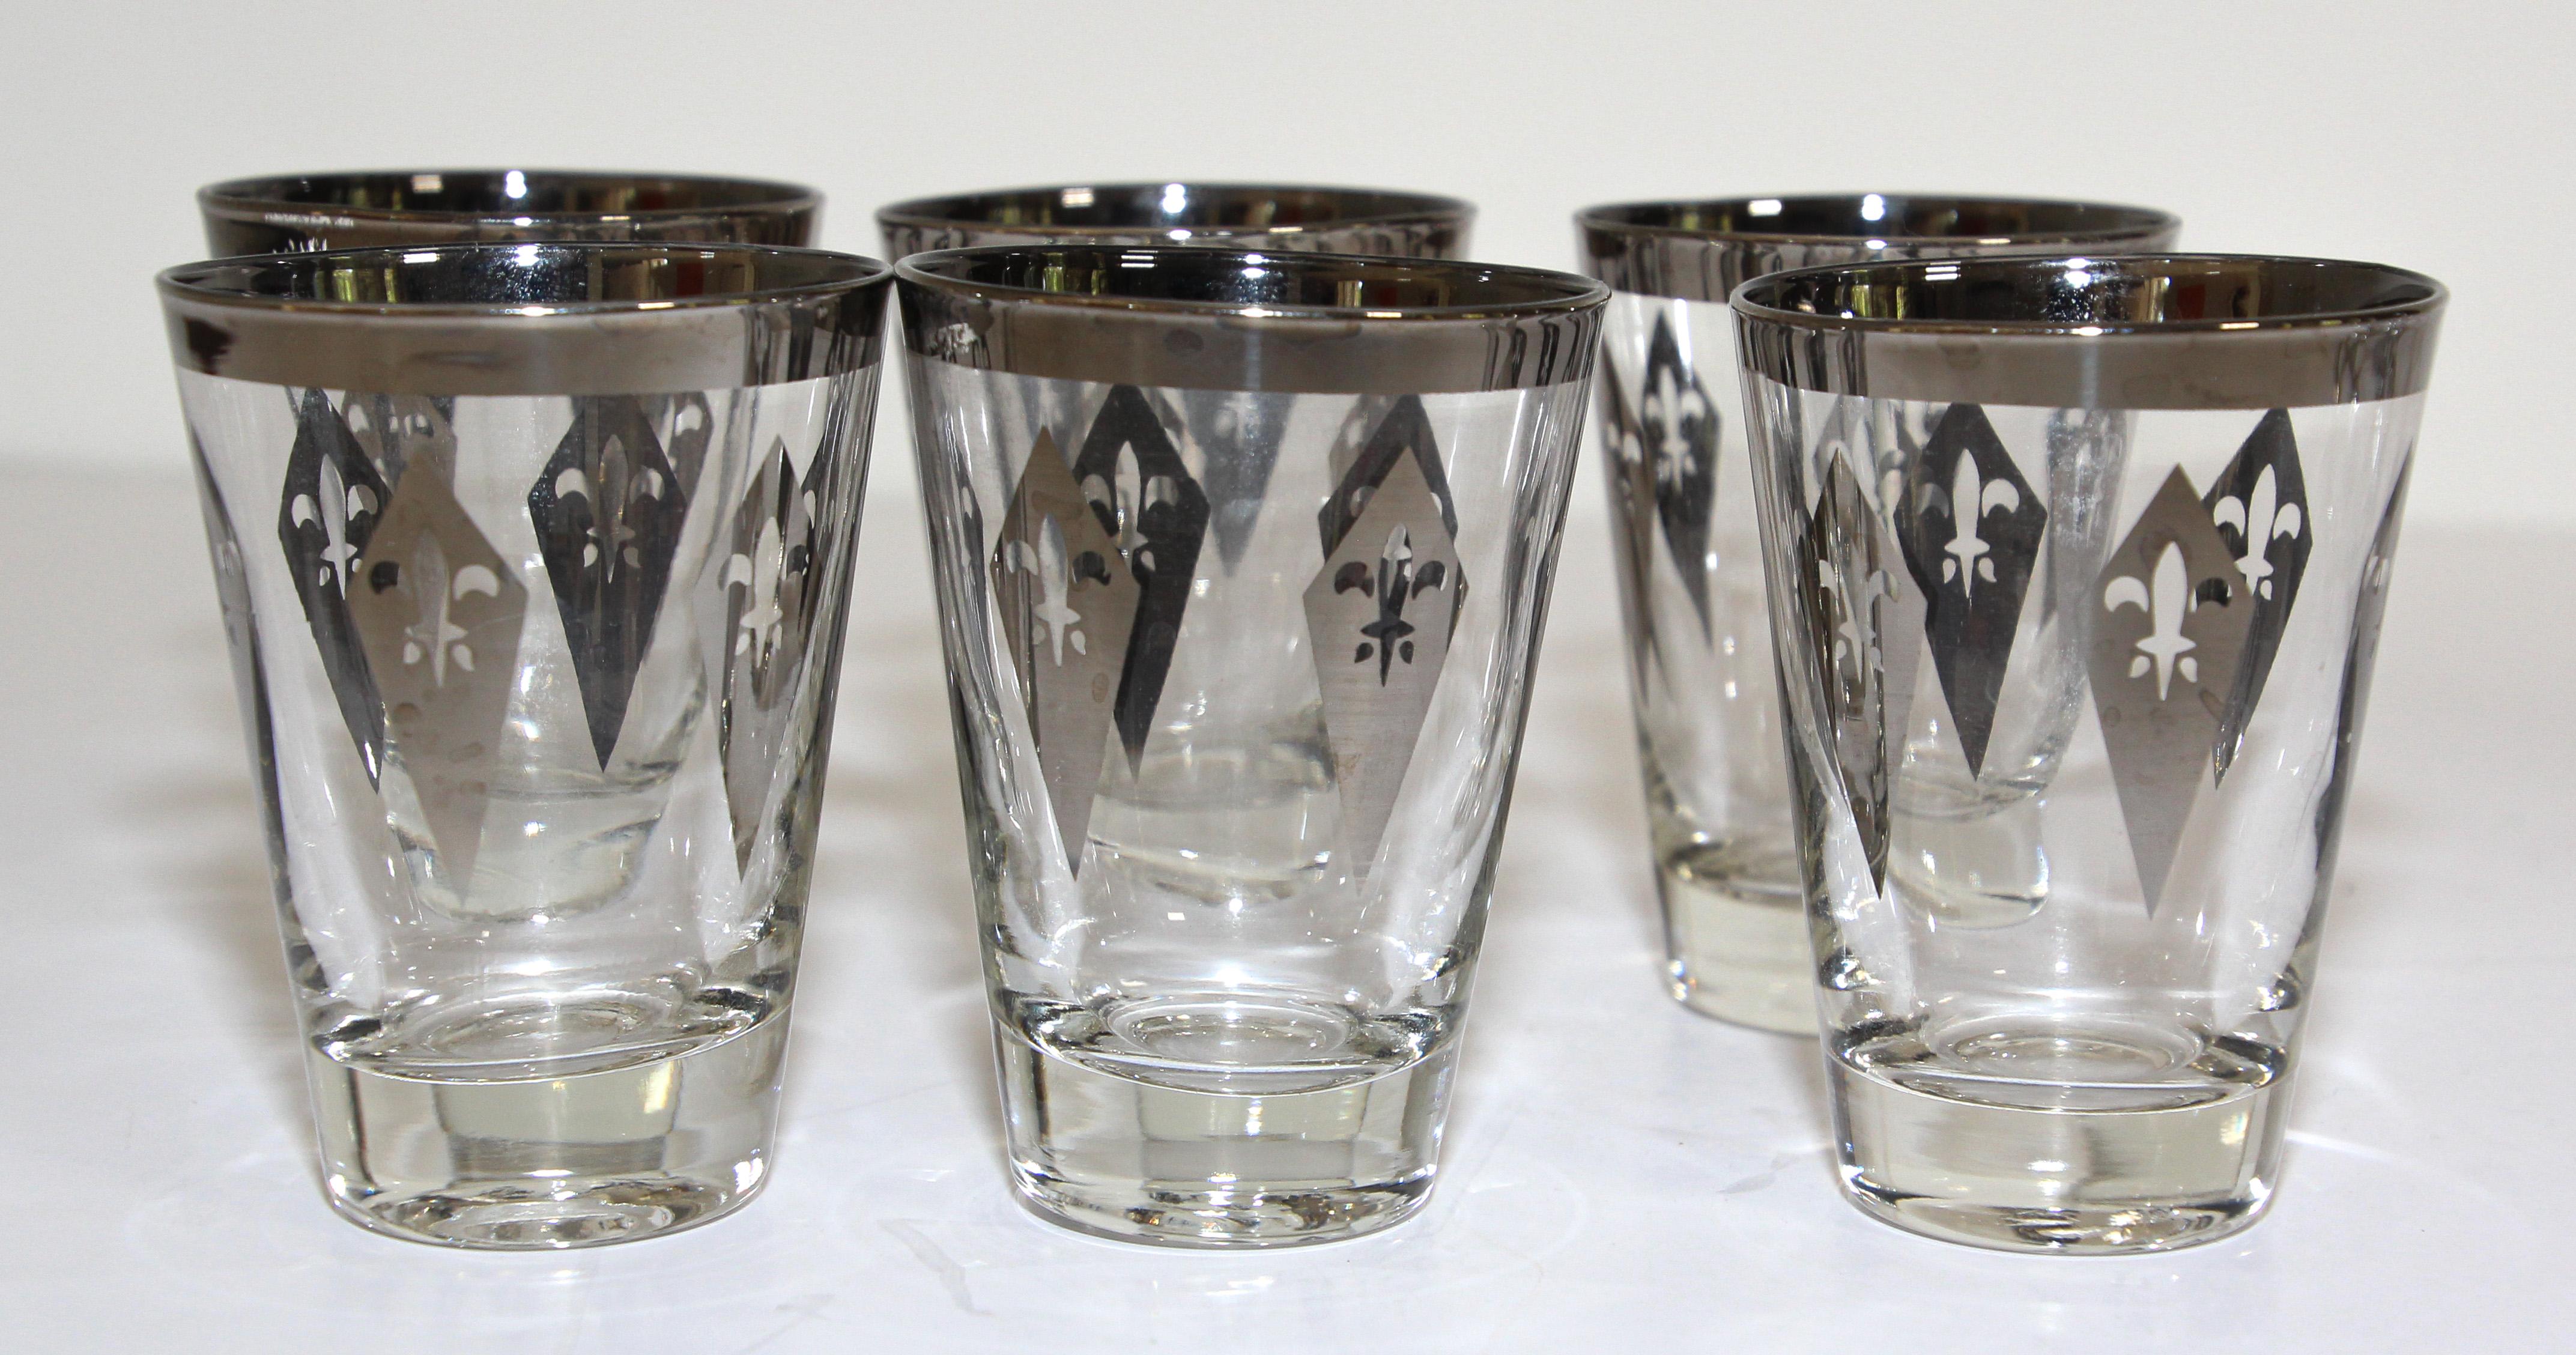 Vintage Barware Set of Six Glasses with Silver Overlay in Carrier Caddy 2